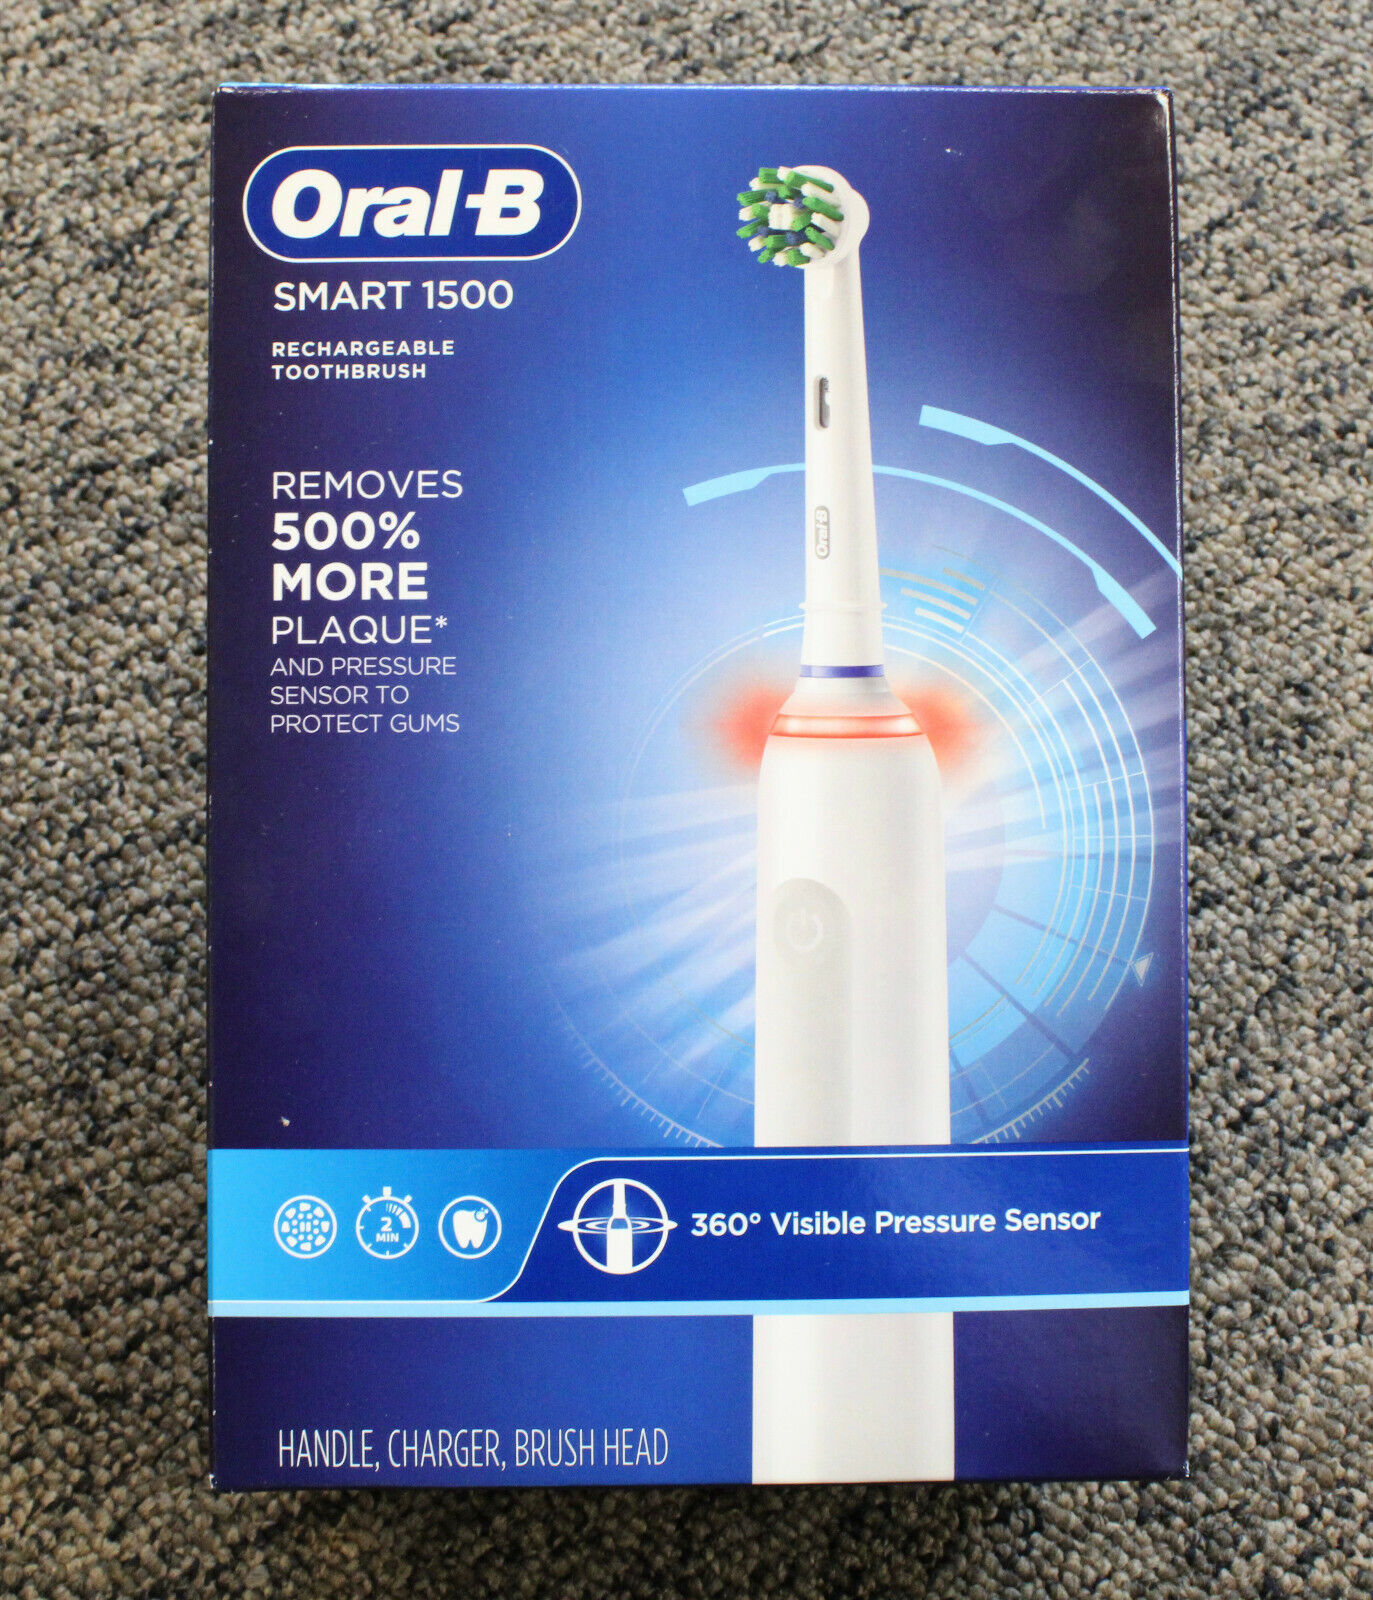 Oral-B Max 55% OFF Smart 1500 Rechargeable Toothbrush Brand New WHITE low-pricing -